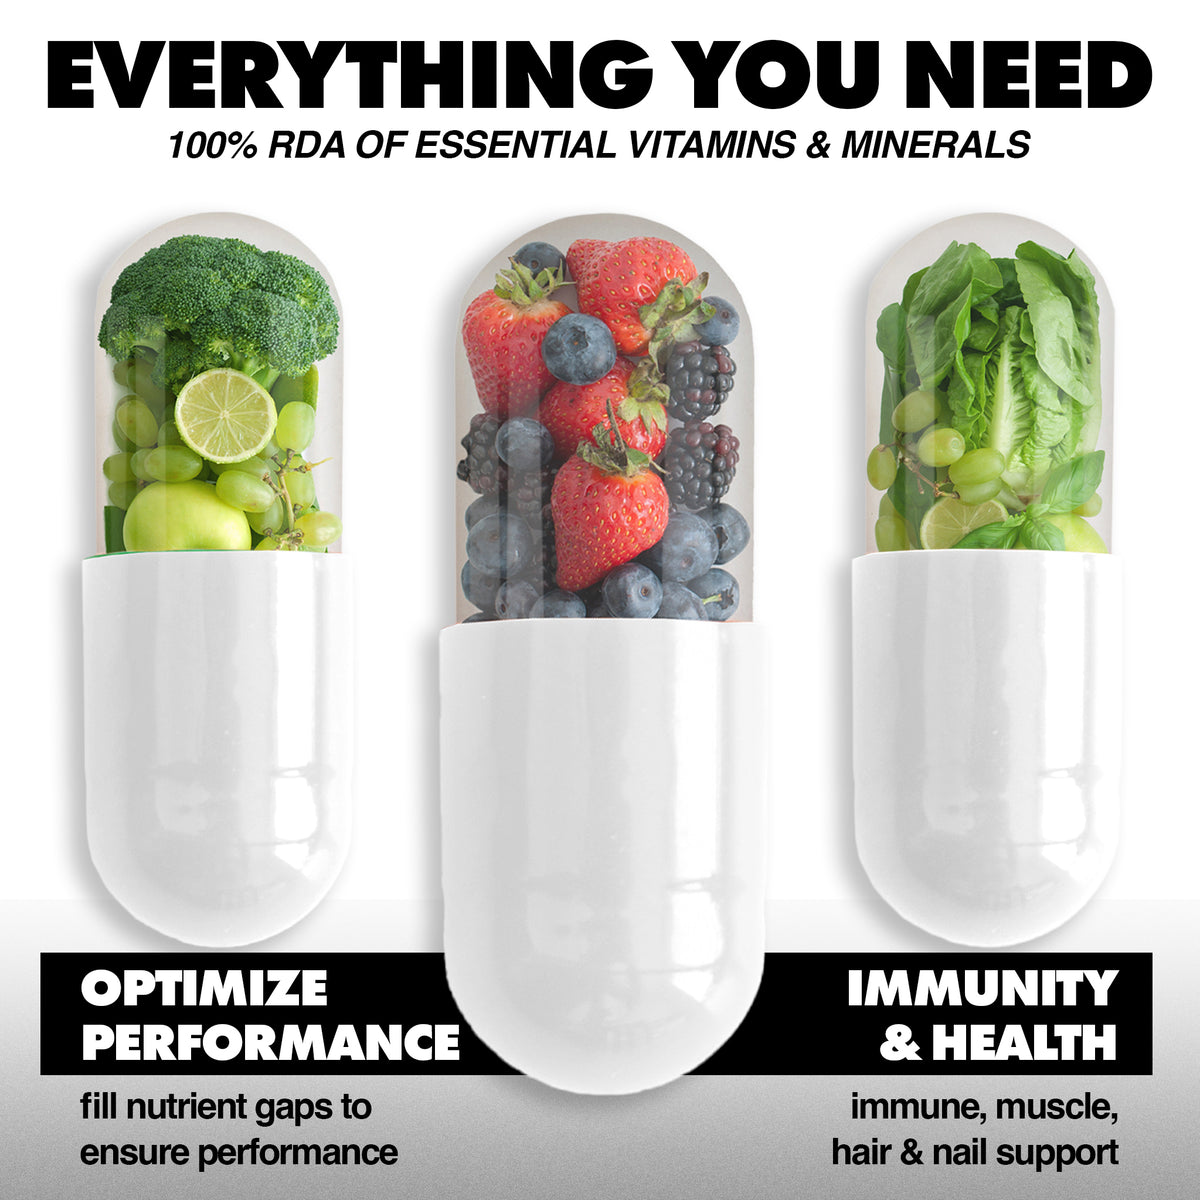 vitamin capsules full of fruit and vegetables. Square 1 benefits: immunity, health, performance